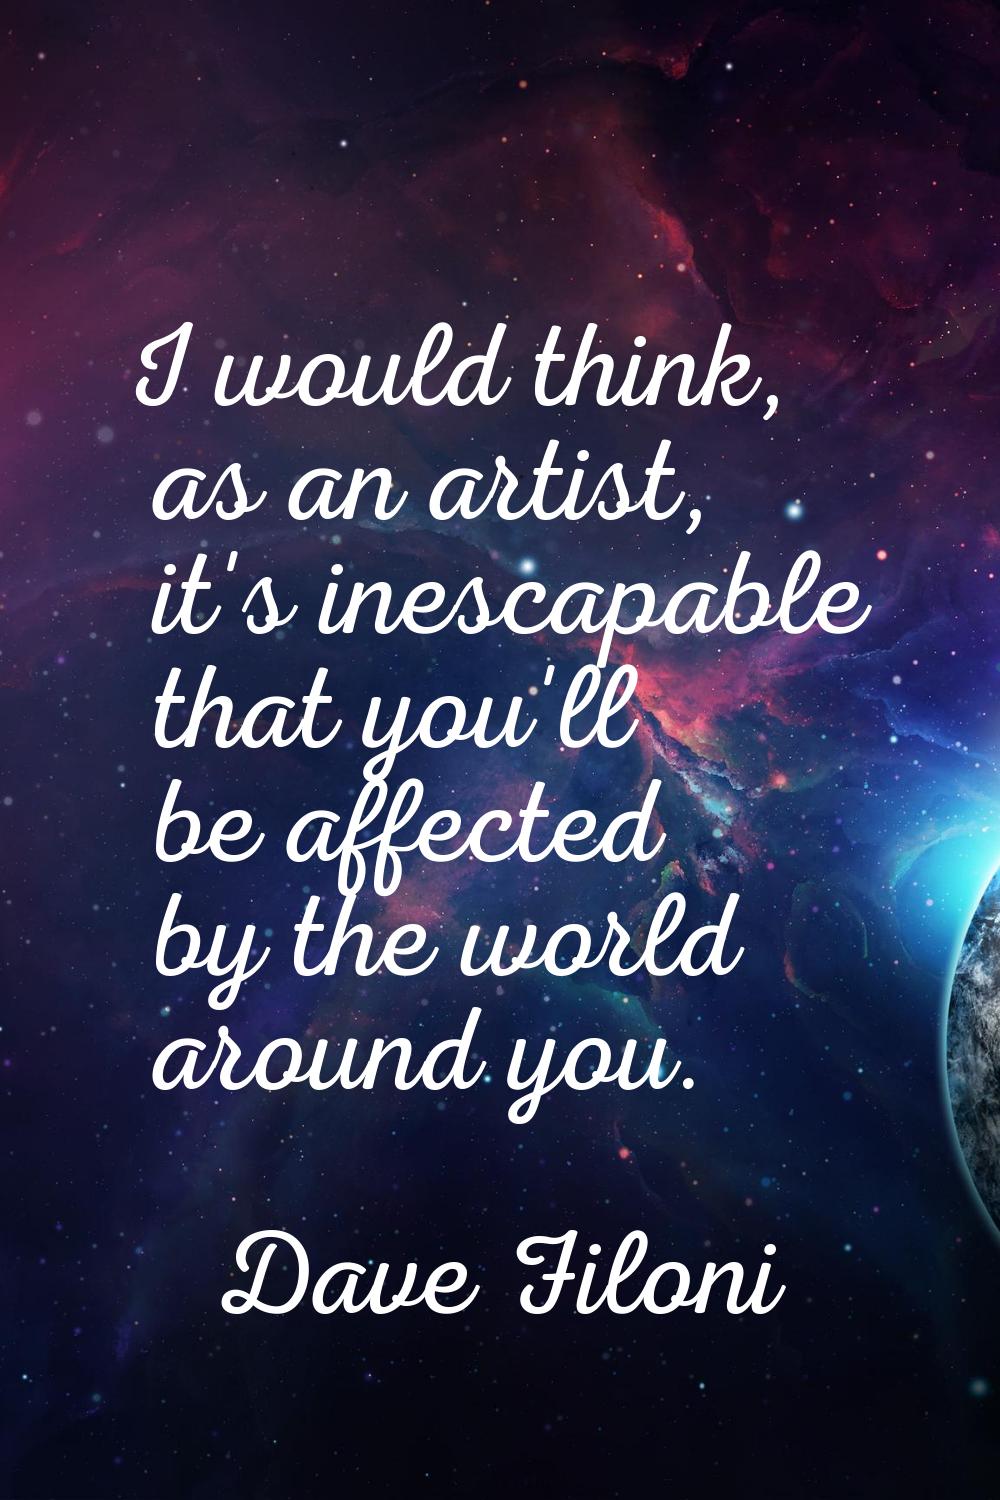 I would think, as an artist, it's inescapable that you'll be affected by the world around you.